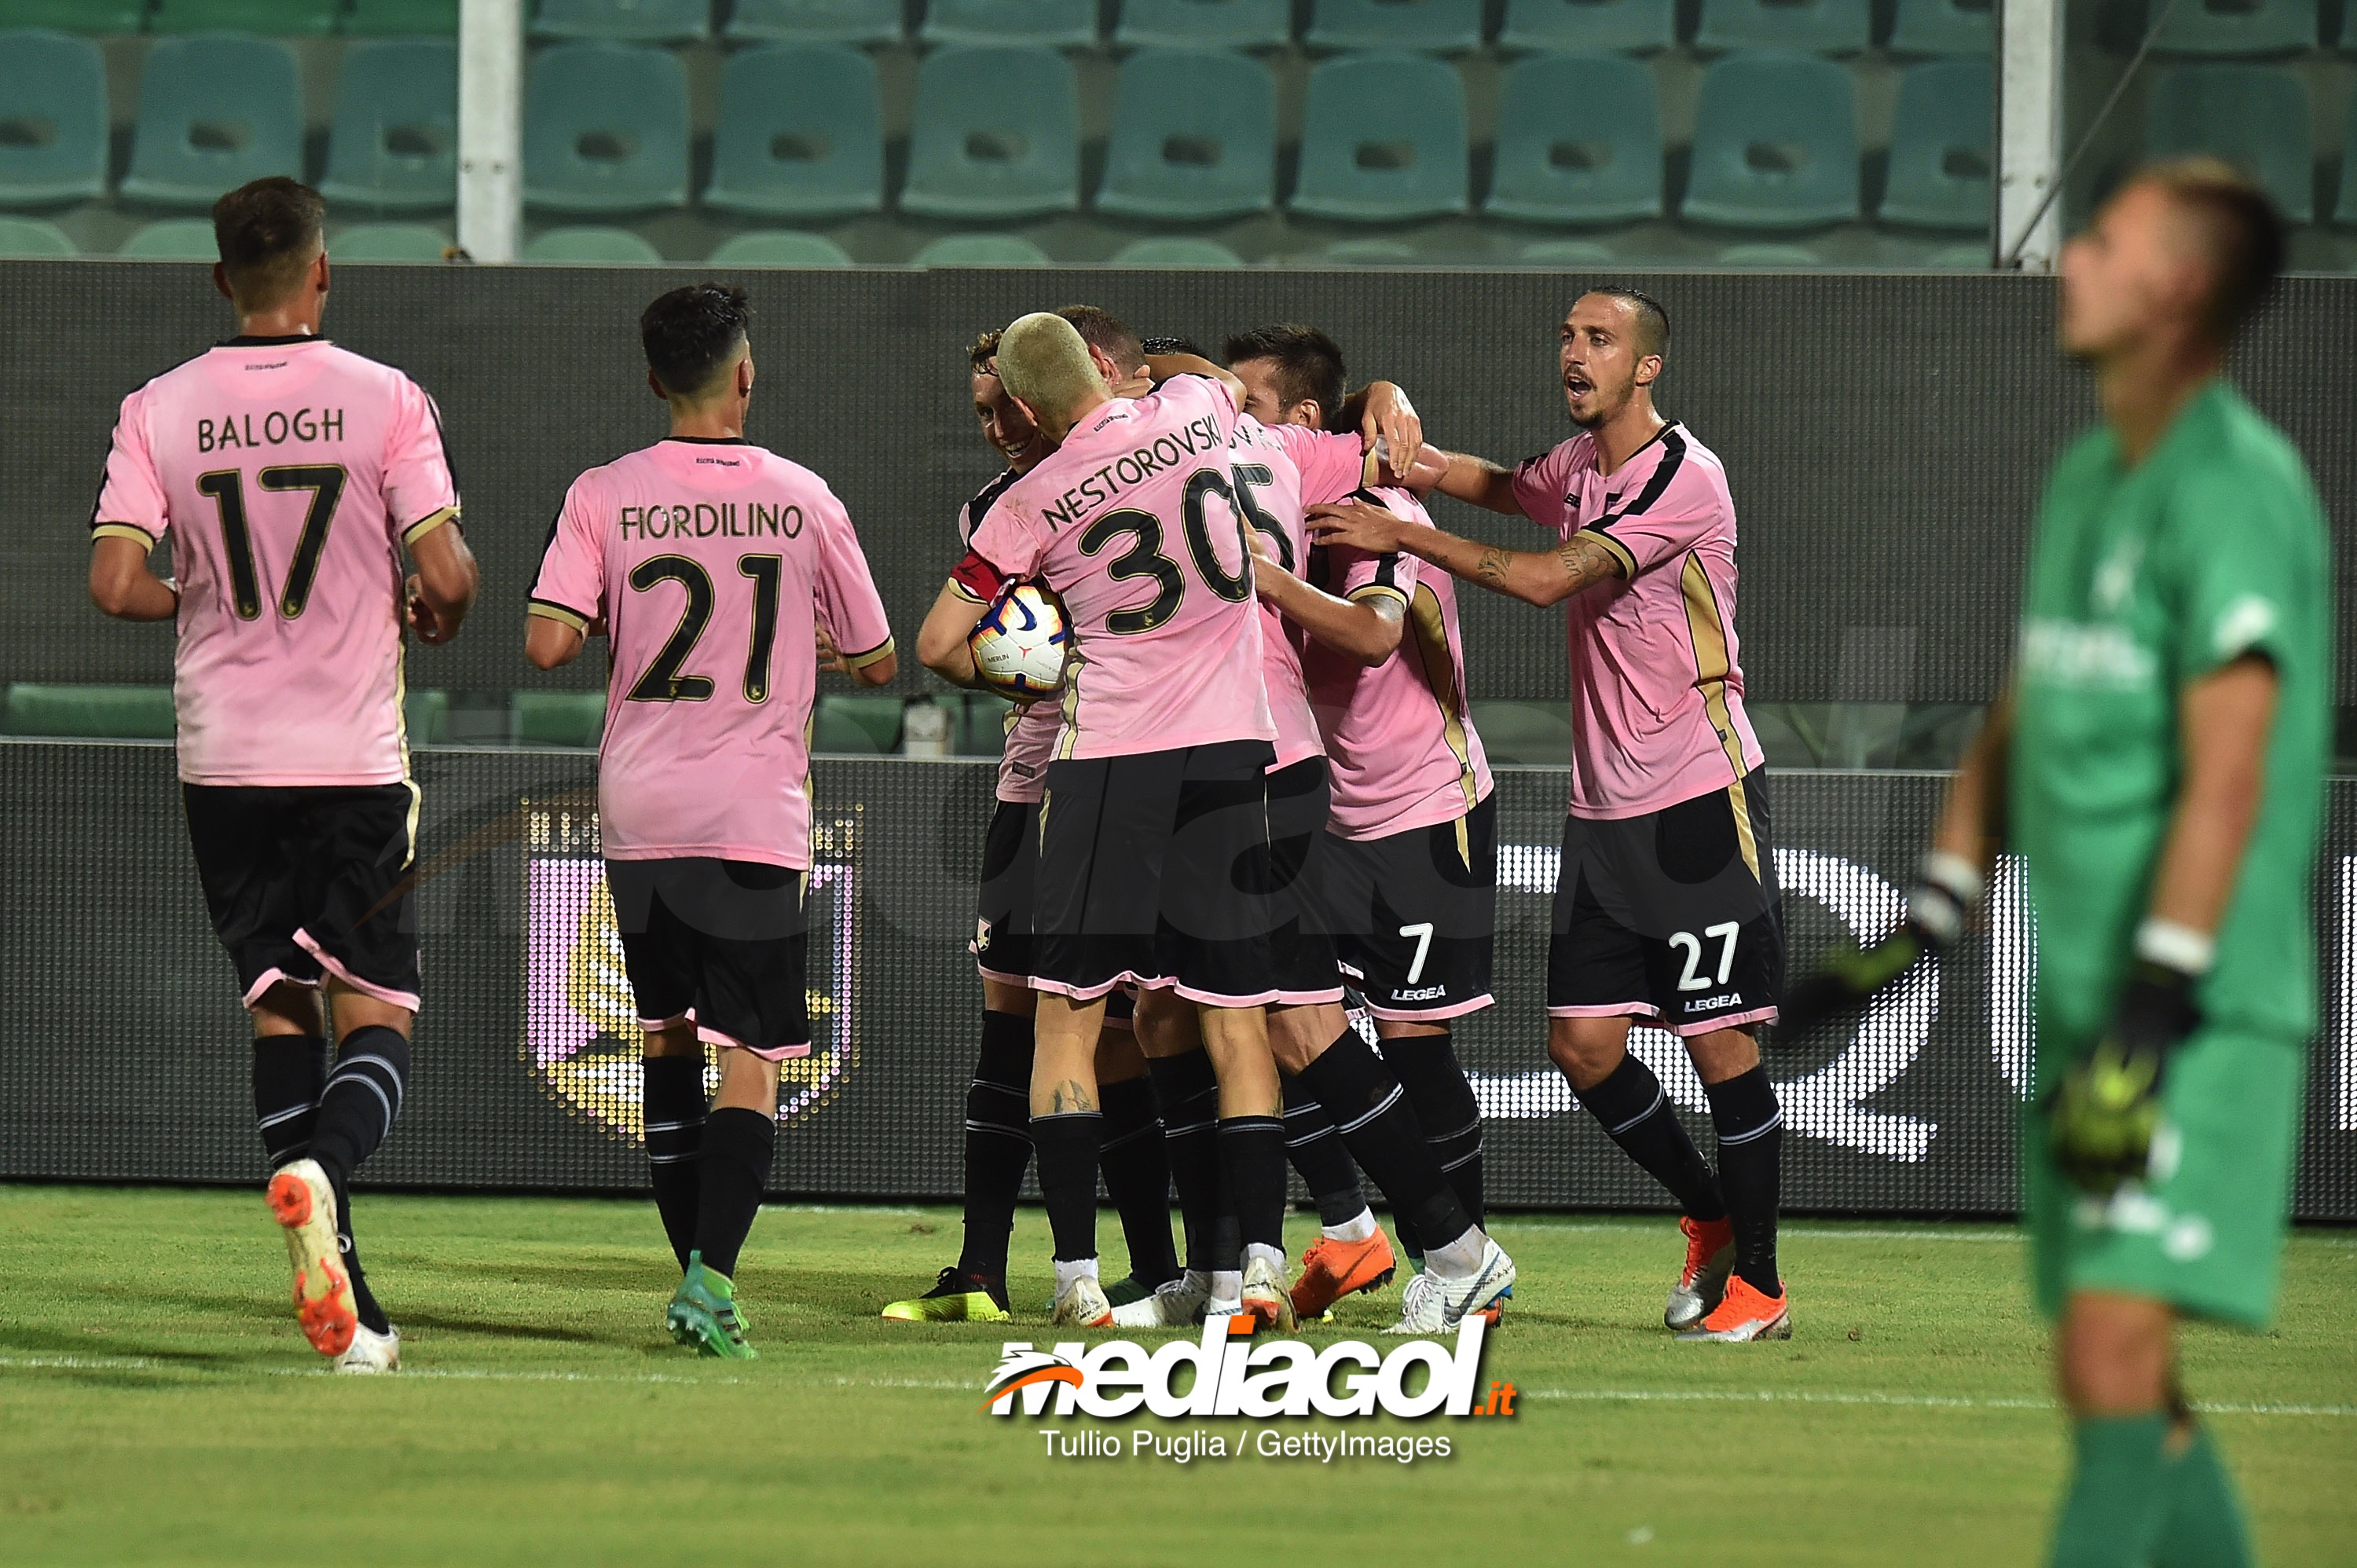 PALERMO, ITALY - AUGUST 05:  Slobodan Rajkovic of Palermo celebrates after scoring the equalizing goal during the TIM Cup match between US Citta' di Palermo and Vicenza Calcio at Stadio Renzo Barbera on August 5, 2018 in Palermo, Italy.  (Photo by Tullio M. Puglia/Getty Images)